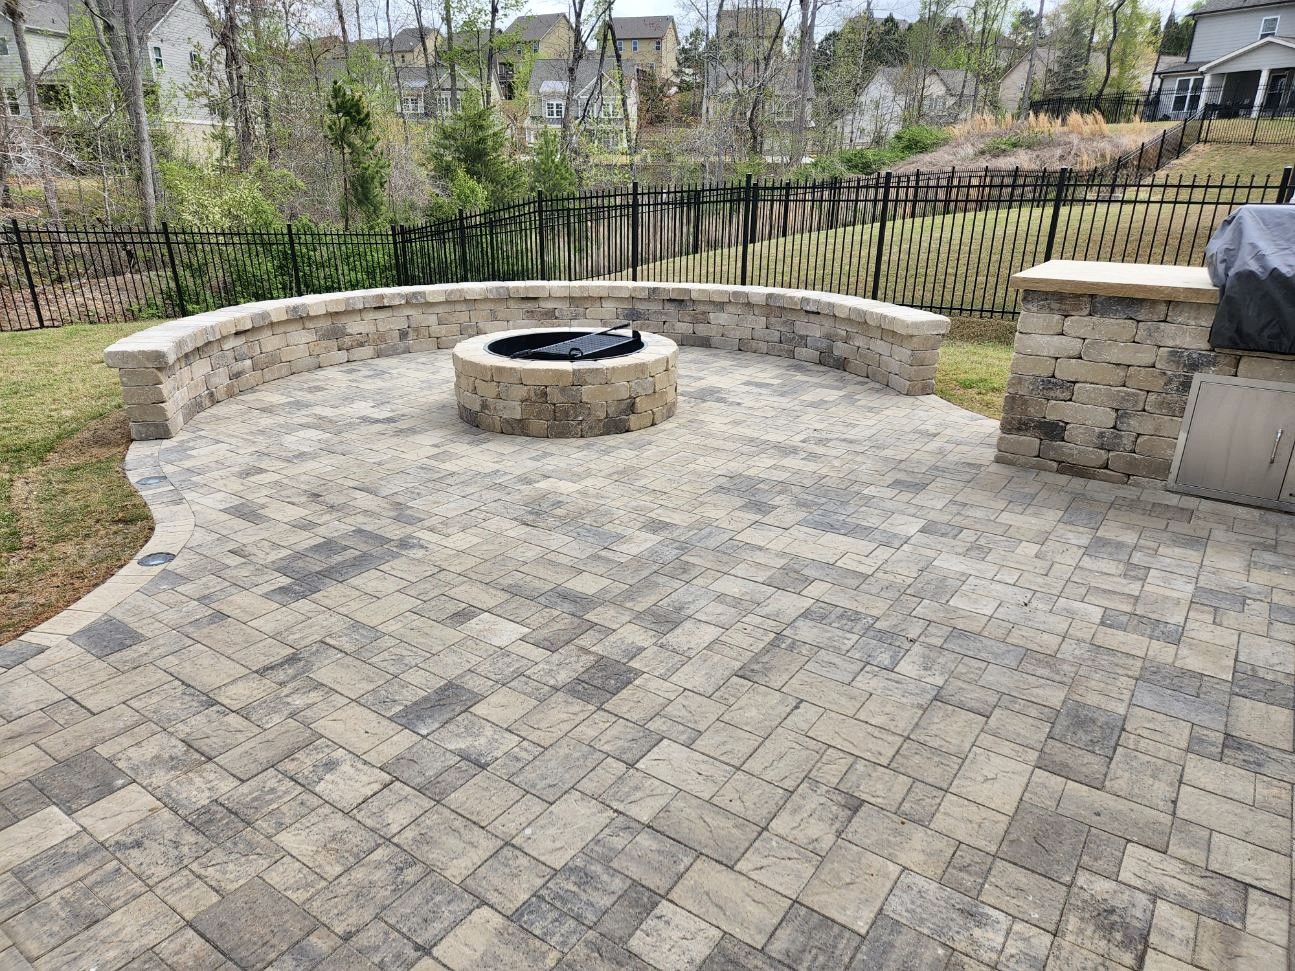 Belgard Patio and Fire Pit by Sugar Hill Outdoors